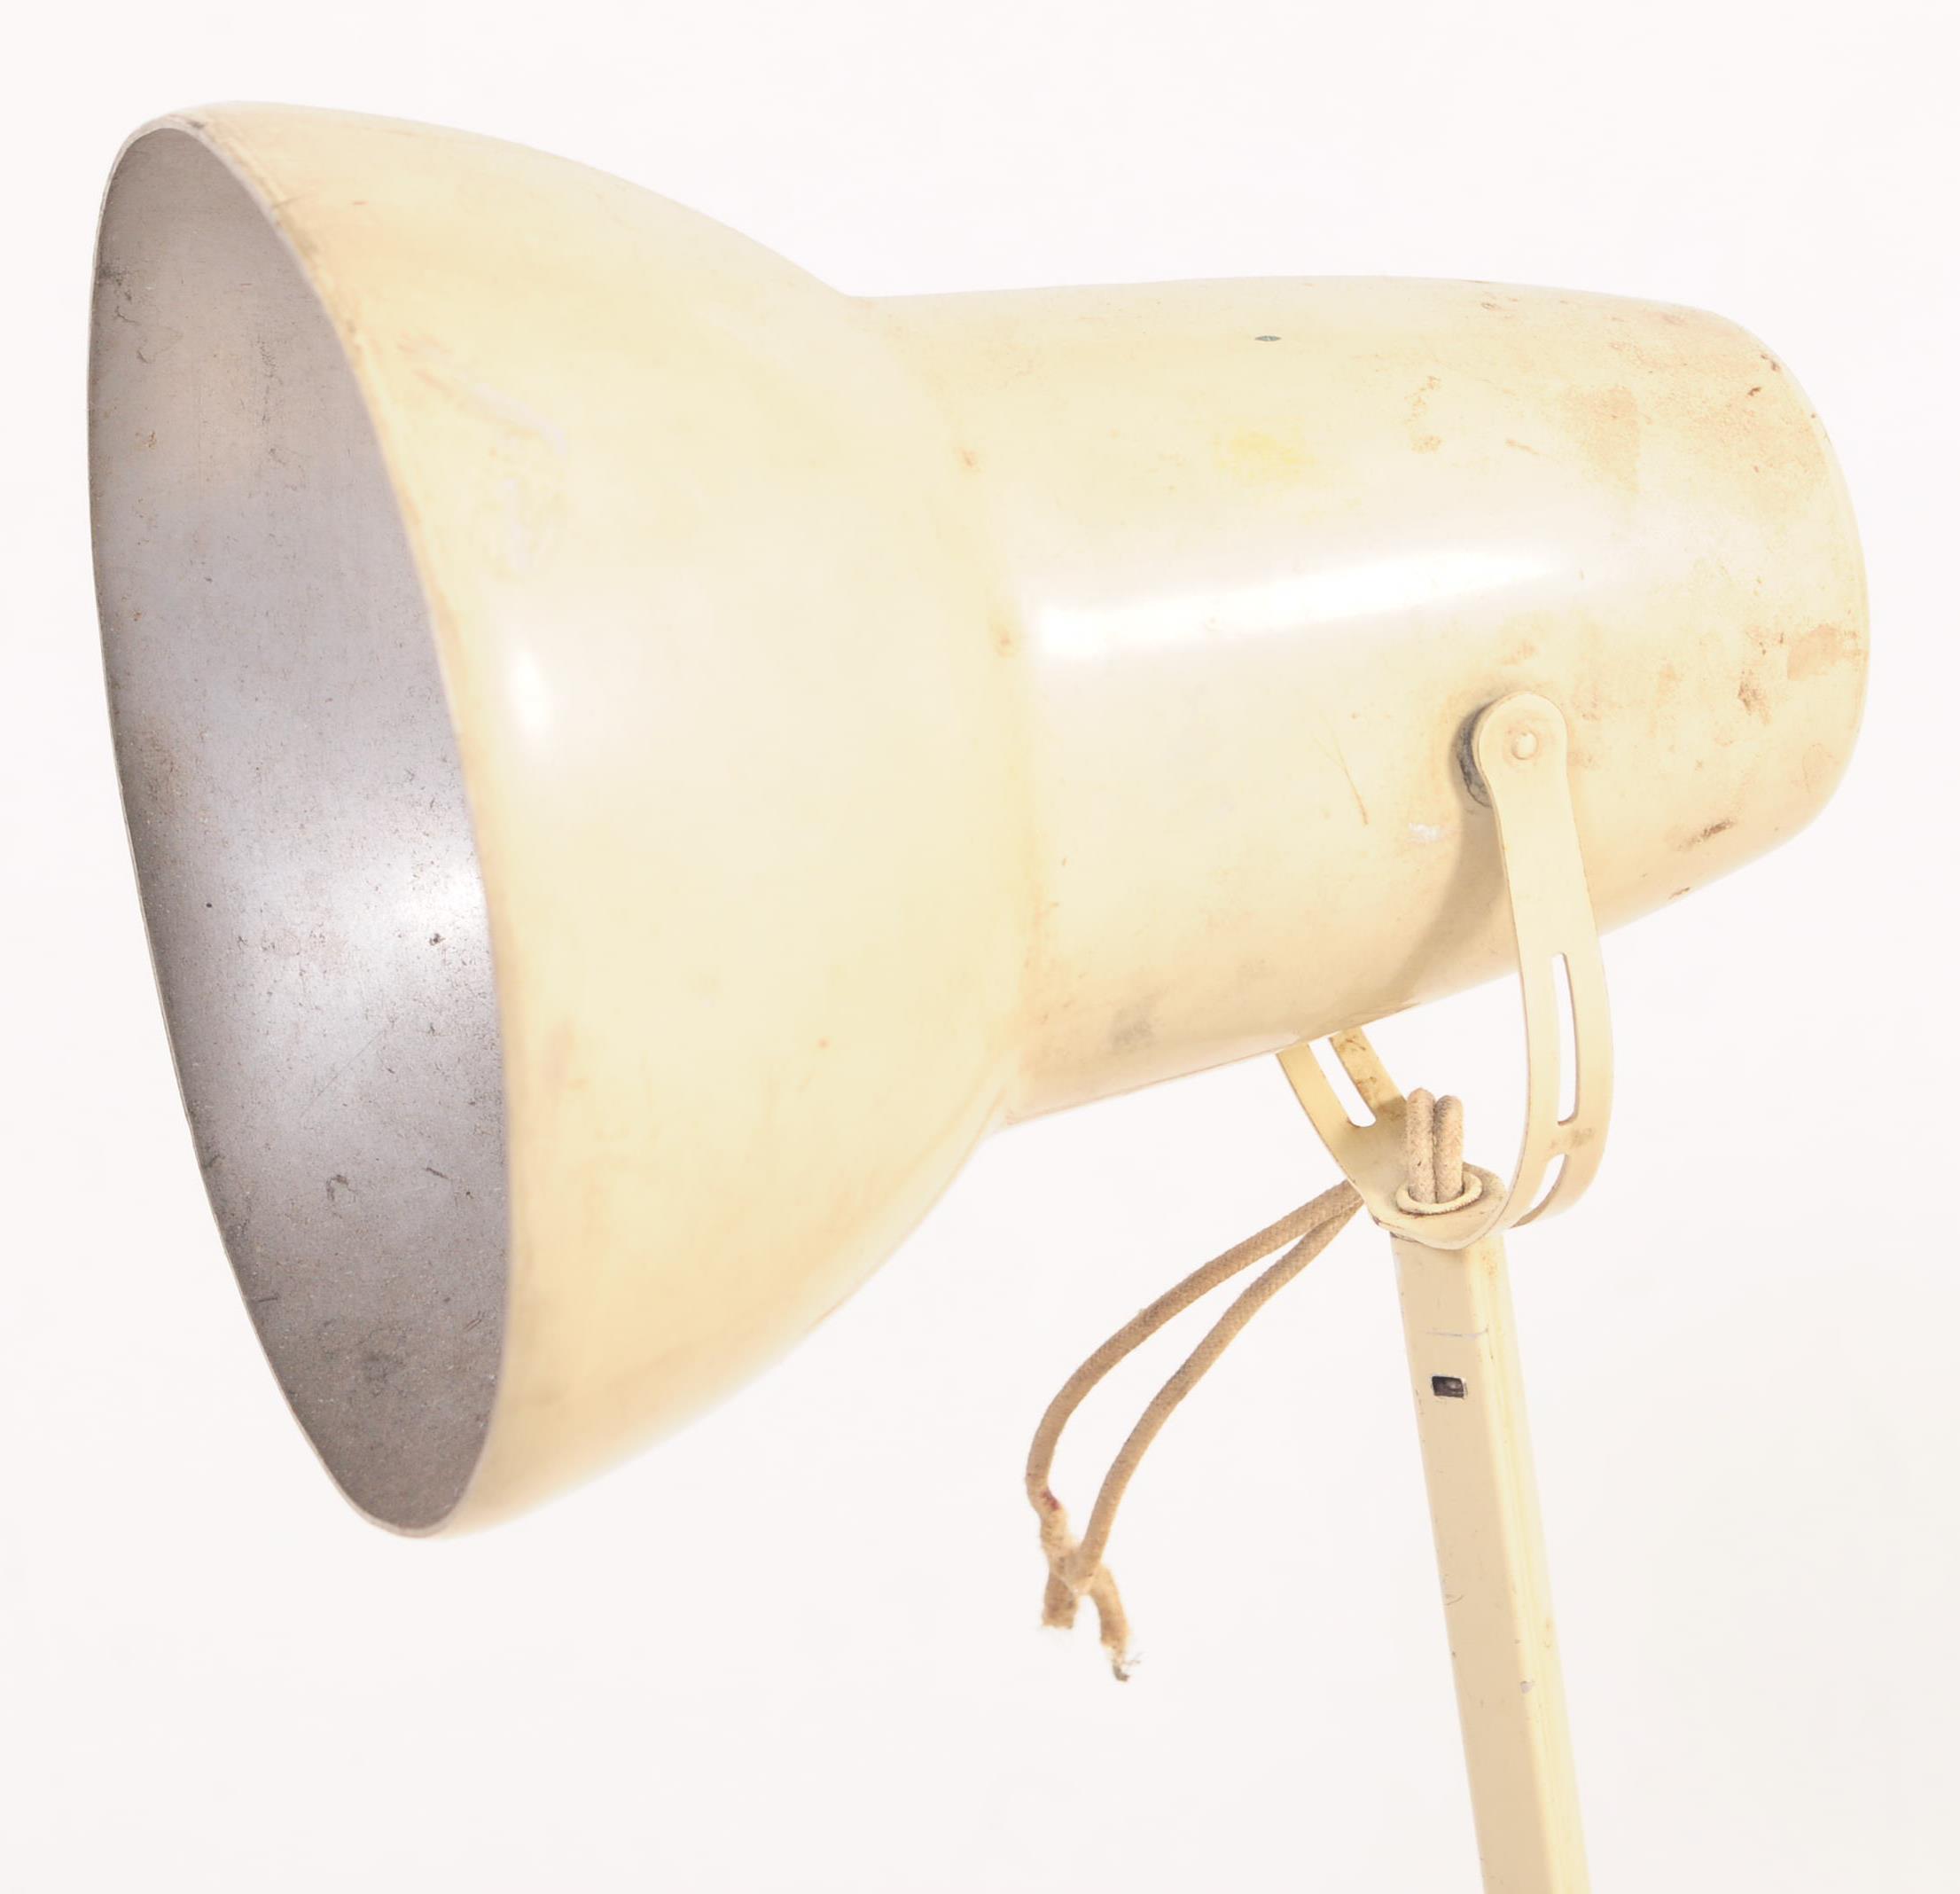 VINTAGE MID 20TH CENTURY ANGLEPOISE INDUSTRIAL LAMP - Image 3 of 4